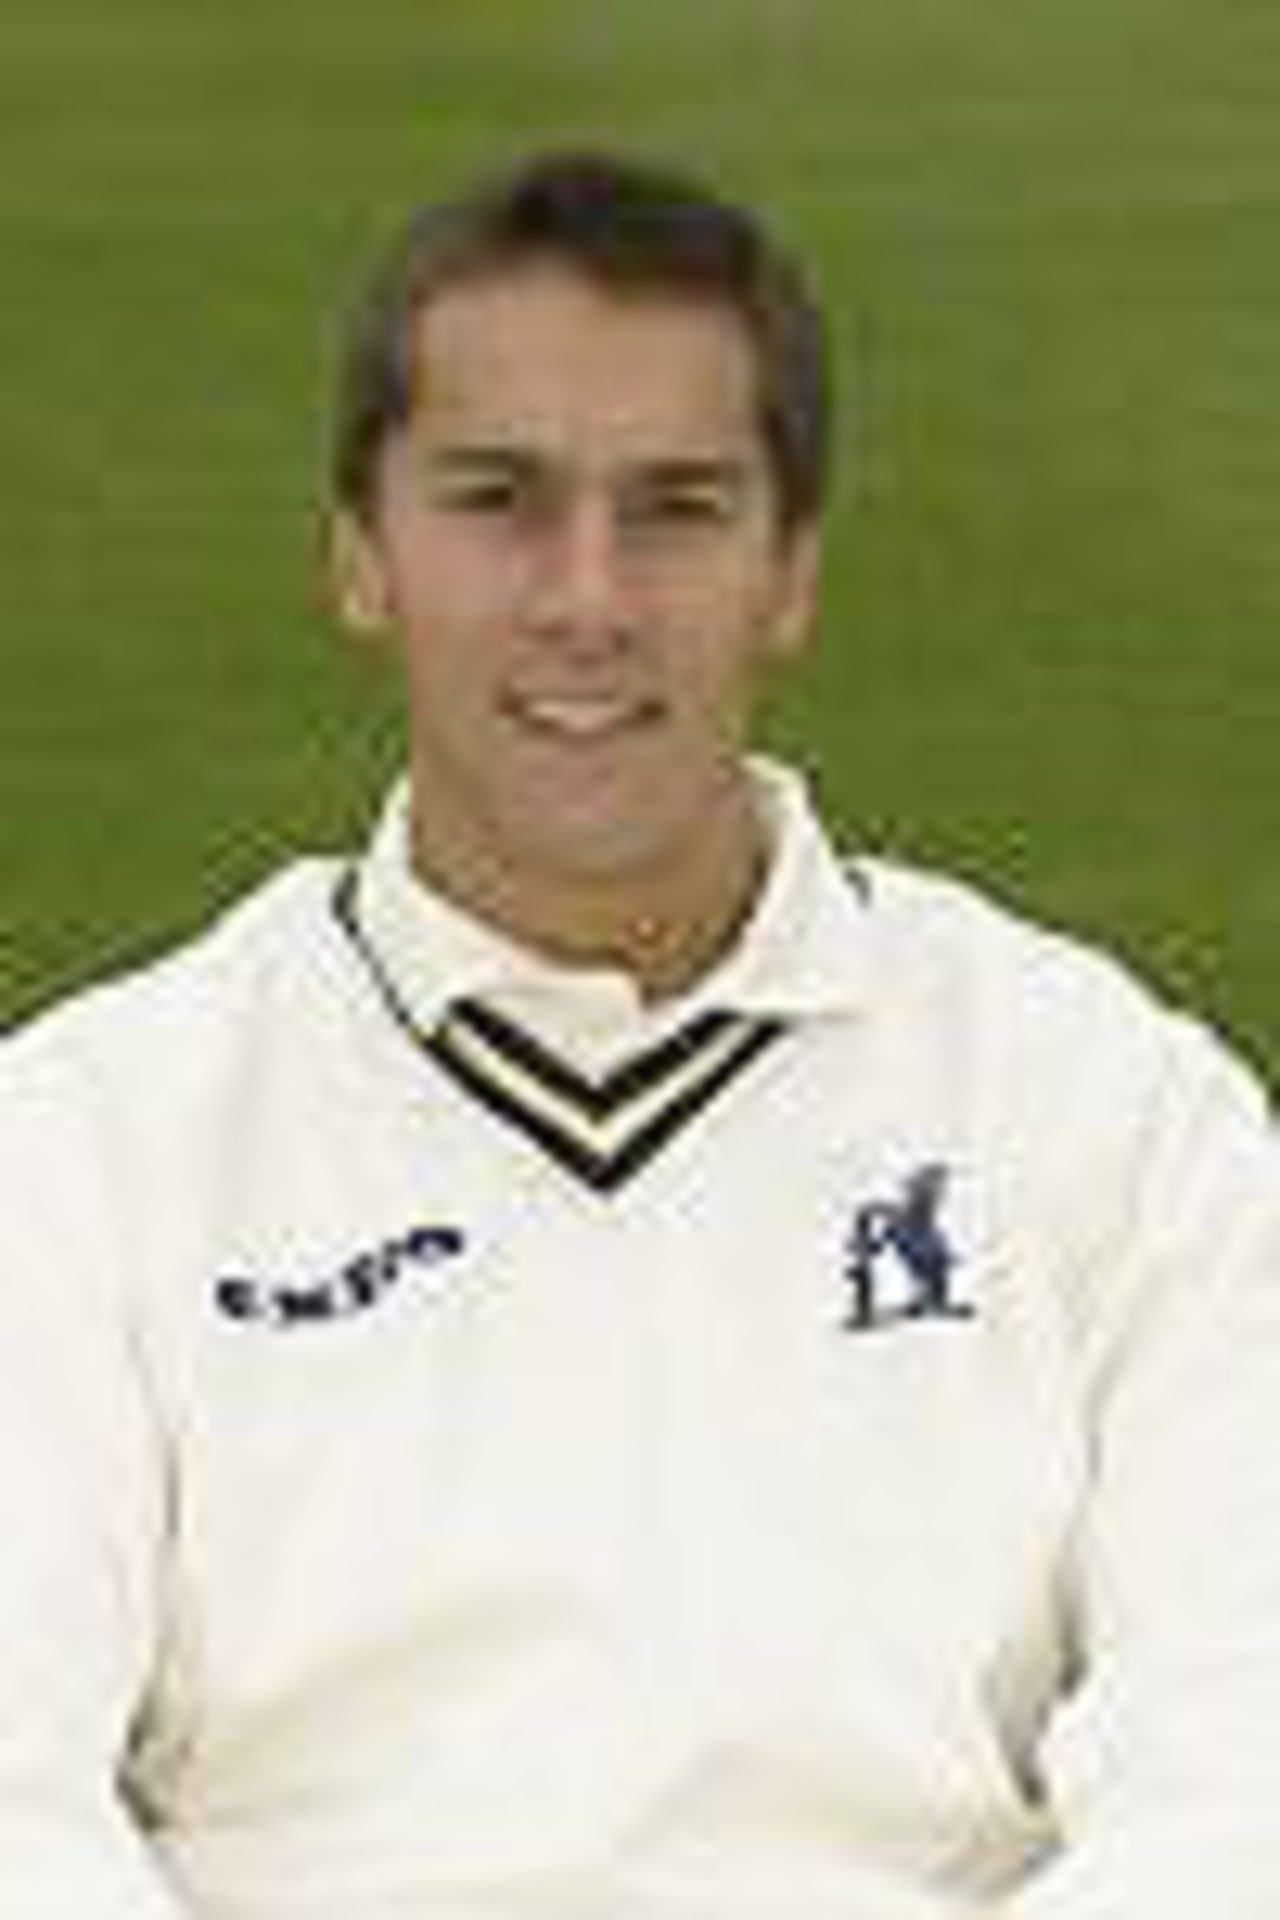 Taken at the 2002 Warwickshire CCC photocall